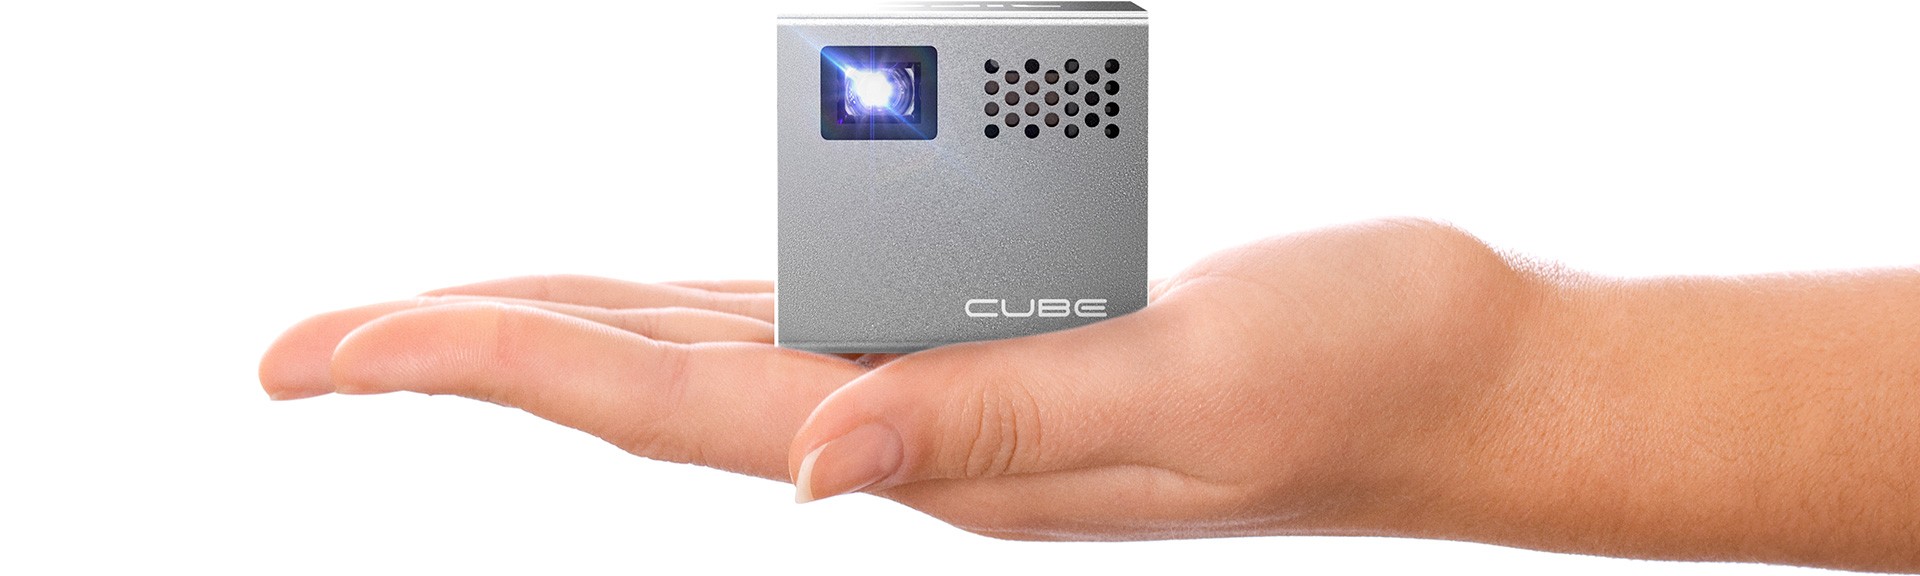 cube projector